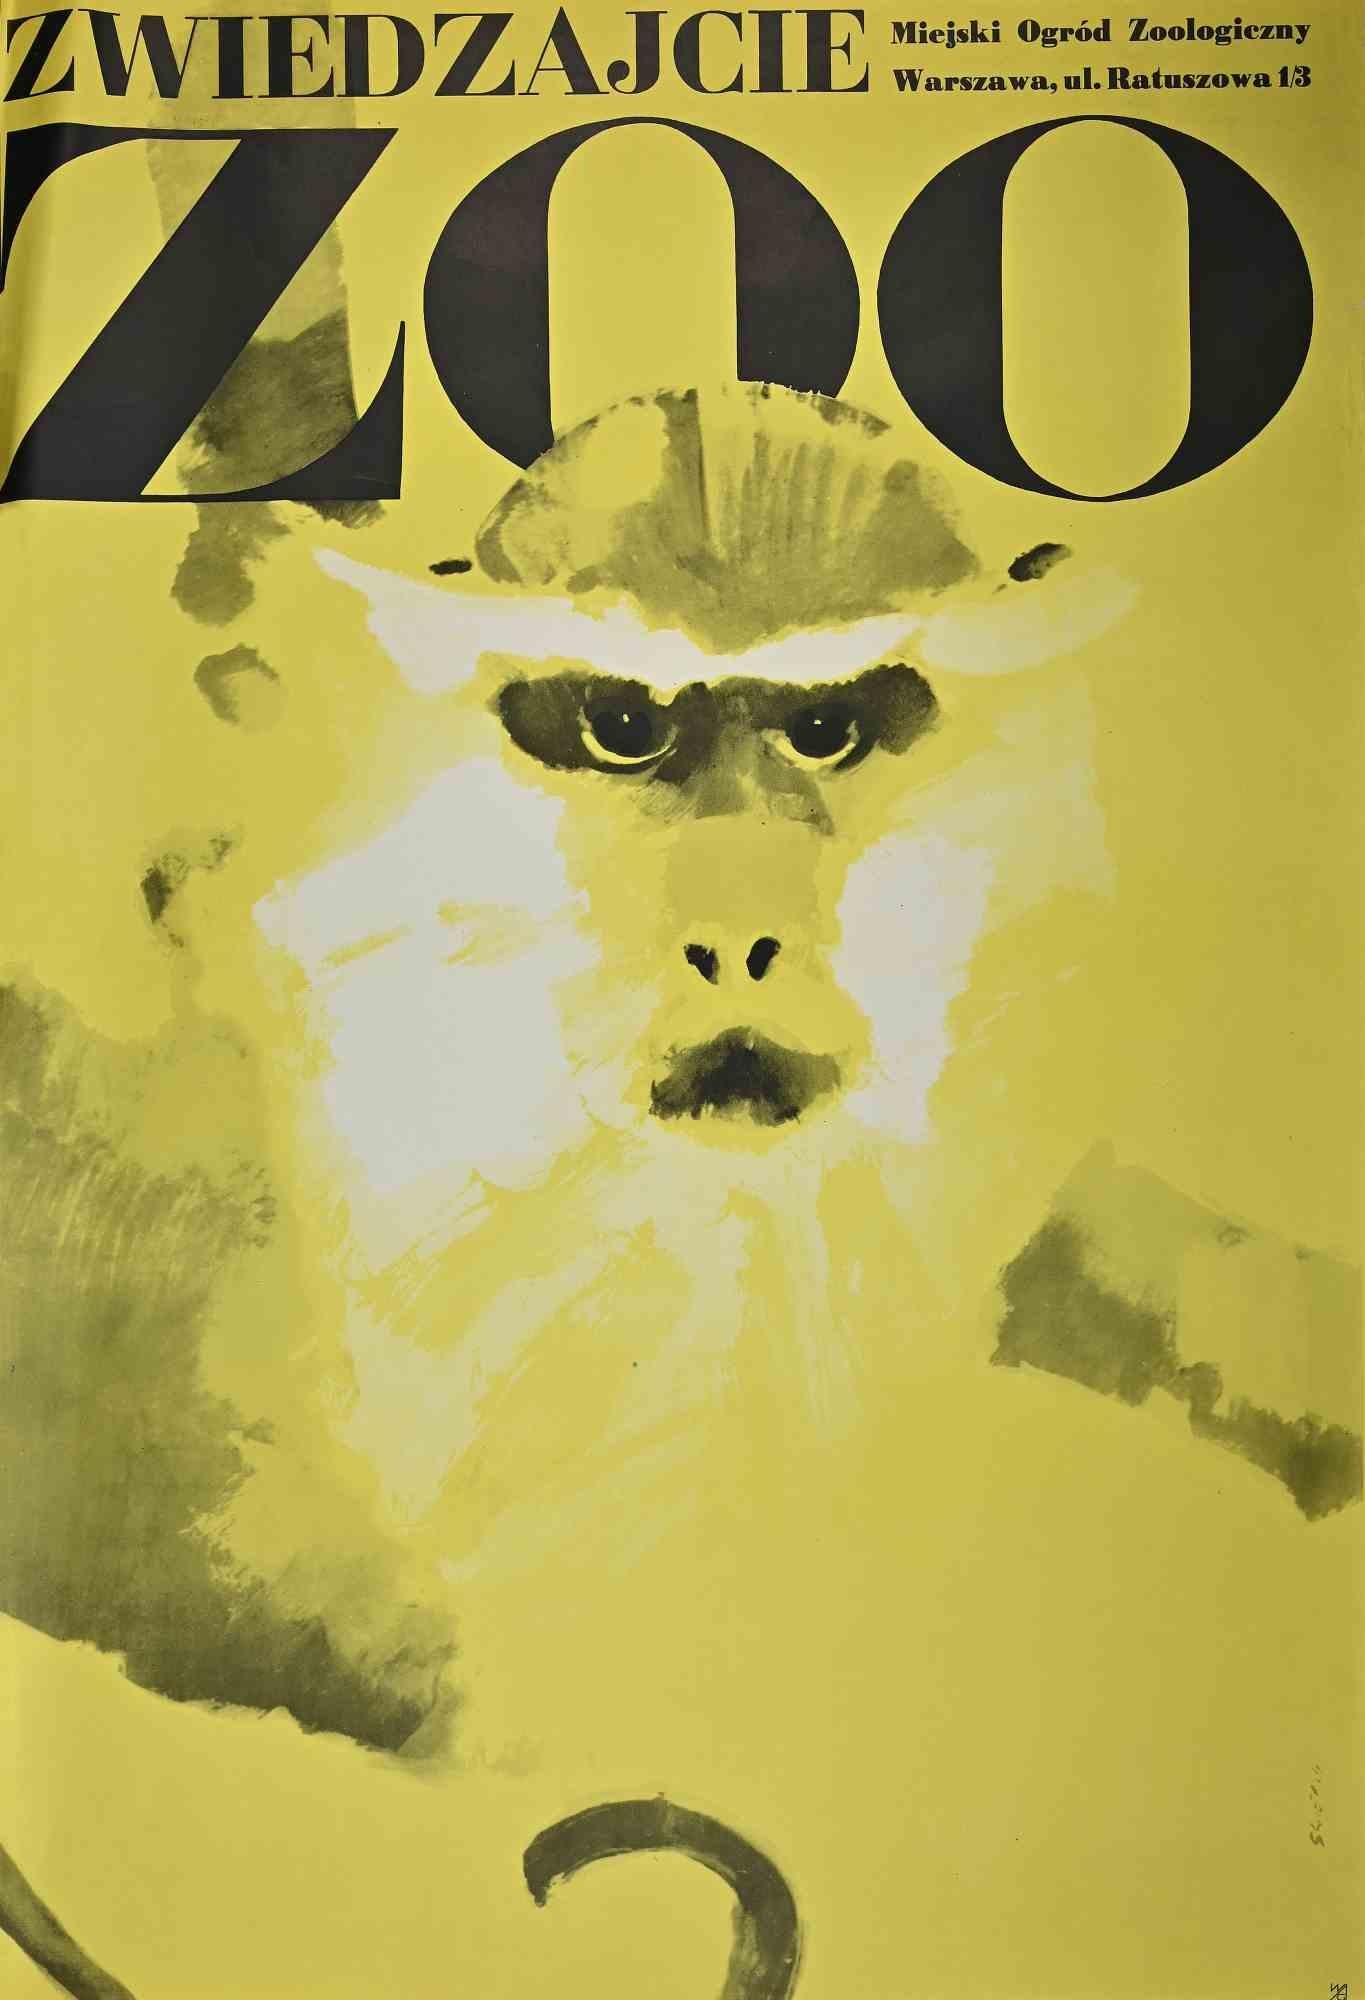 Zoo - Vintage Poster is a vintage poster realized by M. Swierzy, in 1974.

Colored offset print.

Signed n the plate.

Good conditions, except for some cutting on the margins.